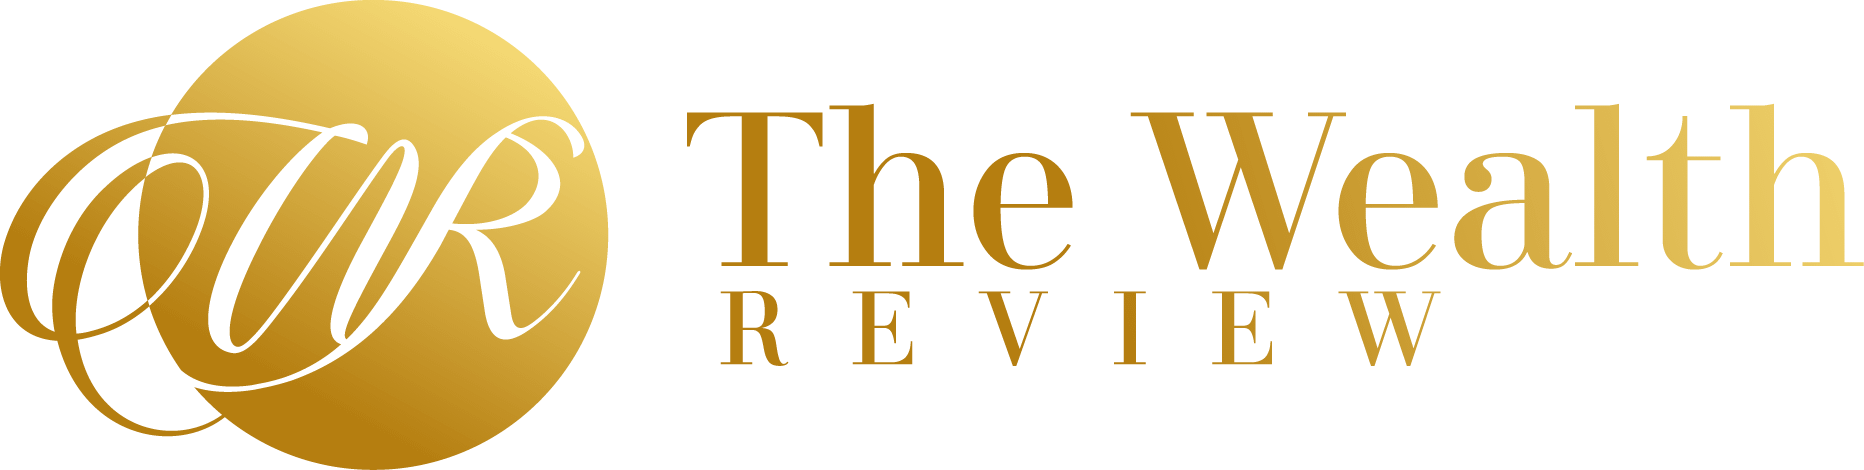 thewealthreview logo